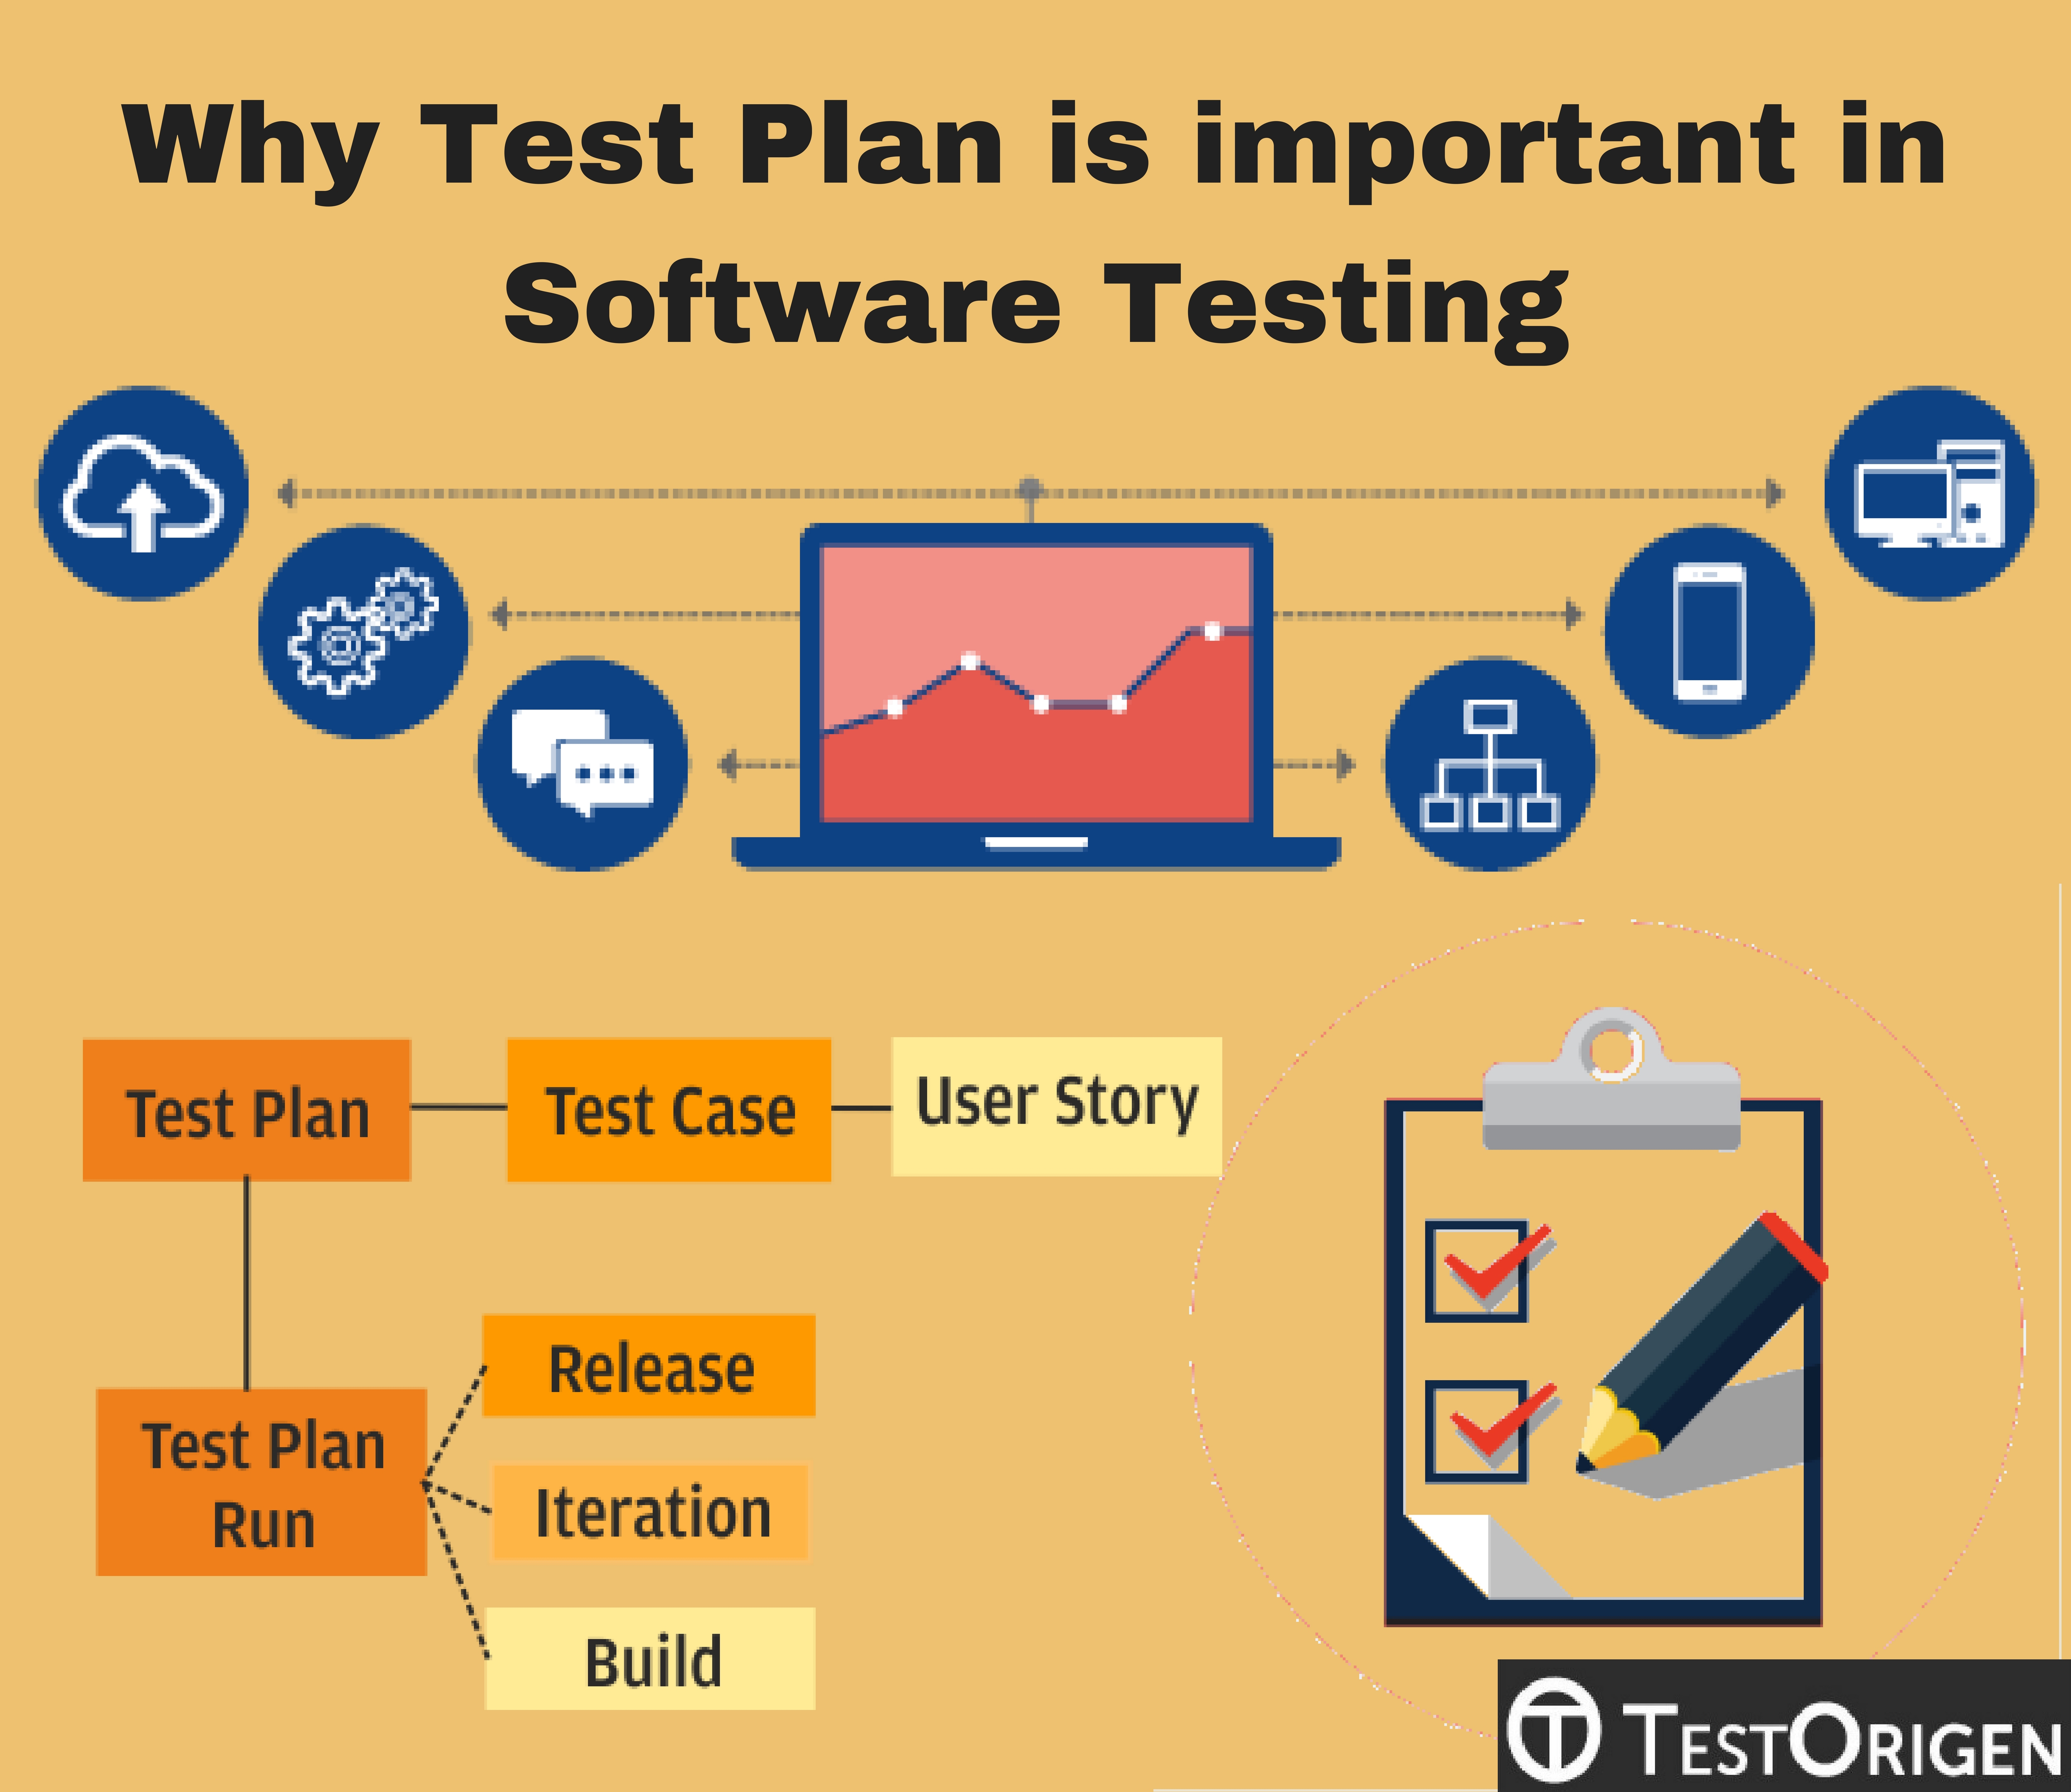 Why Test Plan is important in Software Testing